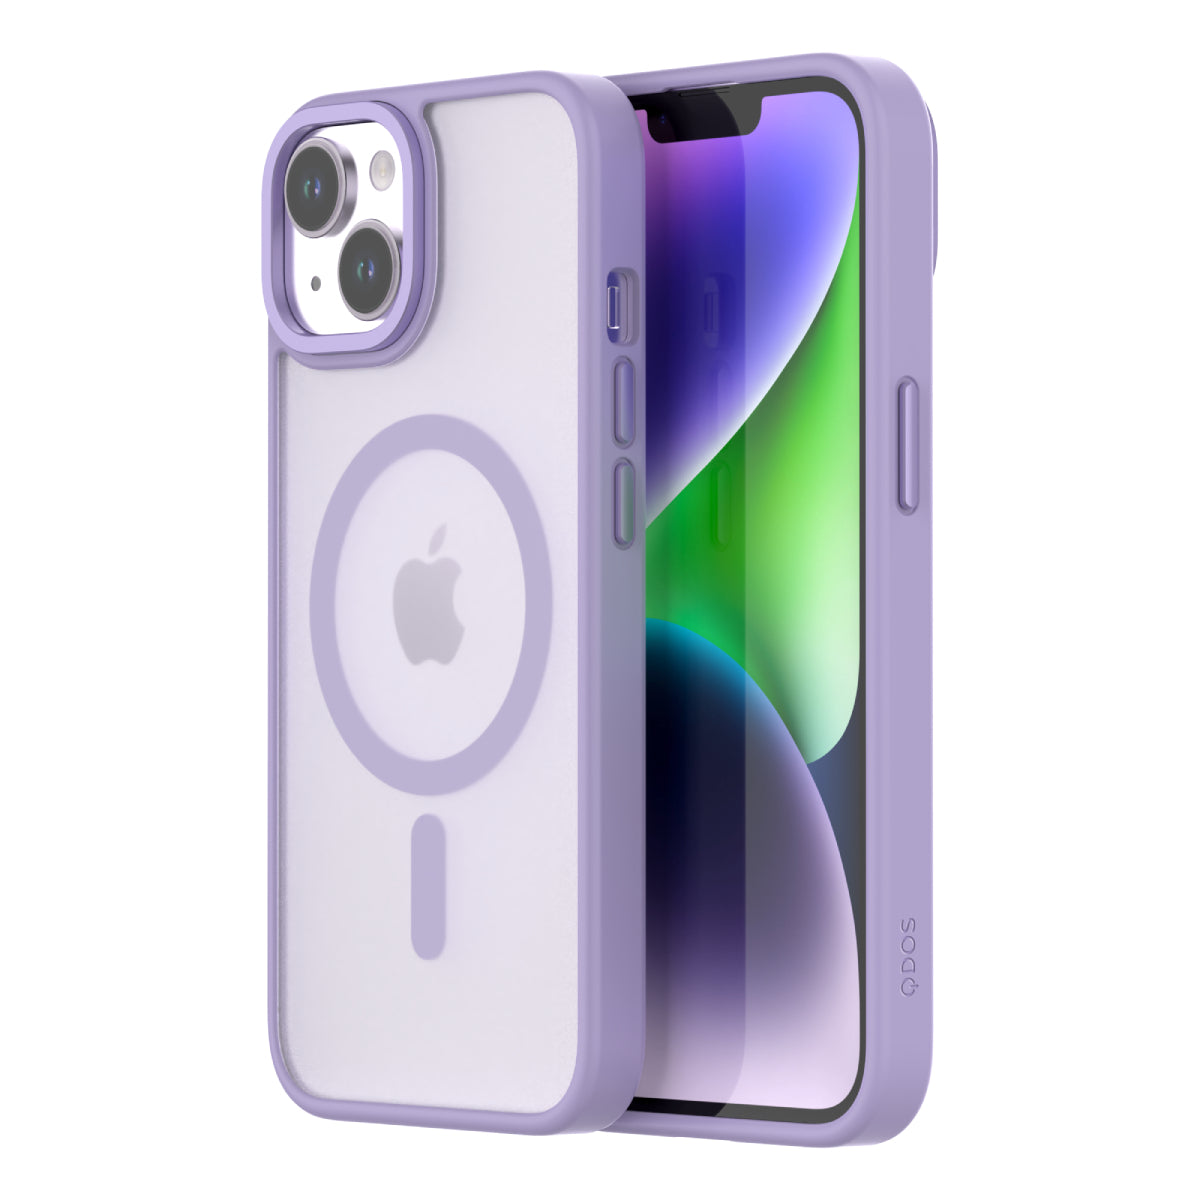 iPhone 14/13 Hybrid Soft + Snap protective case from QDOS in Lavender color TPU frame and clear polycarbonate back showing front and back